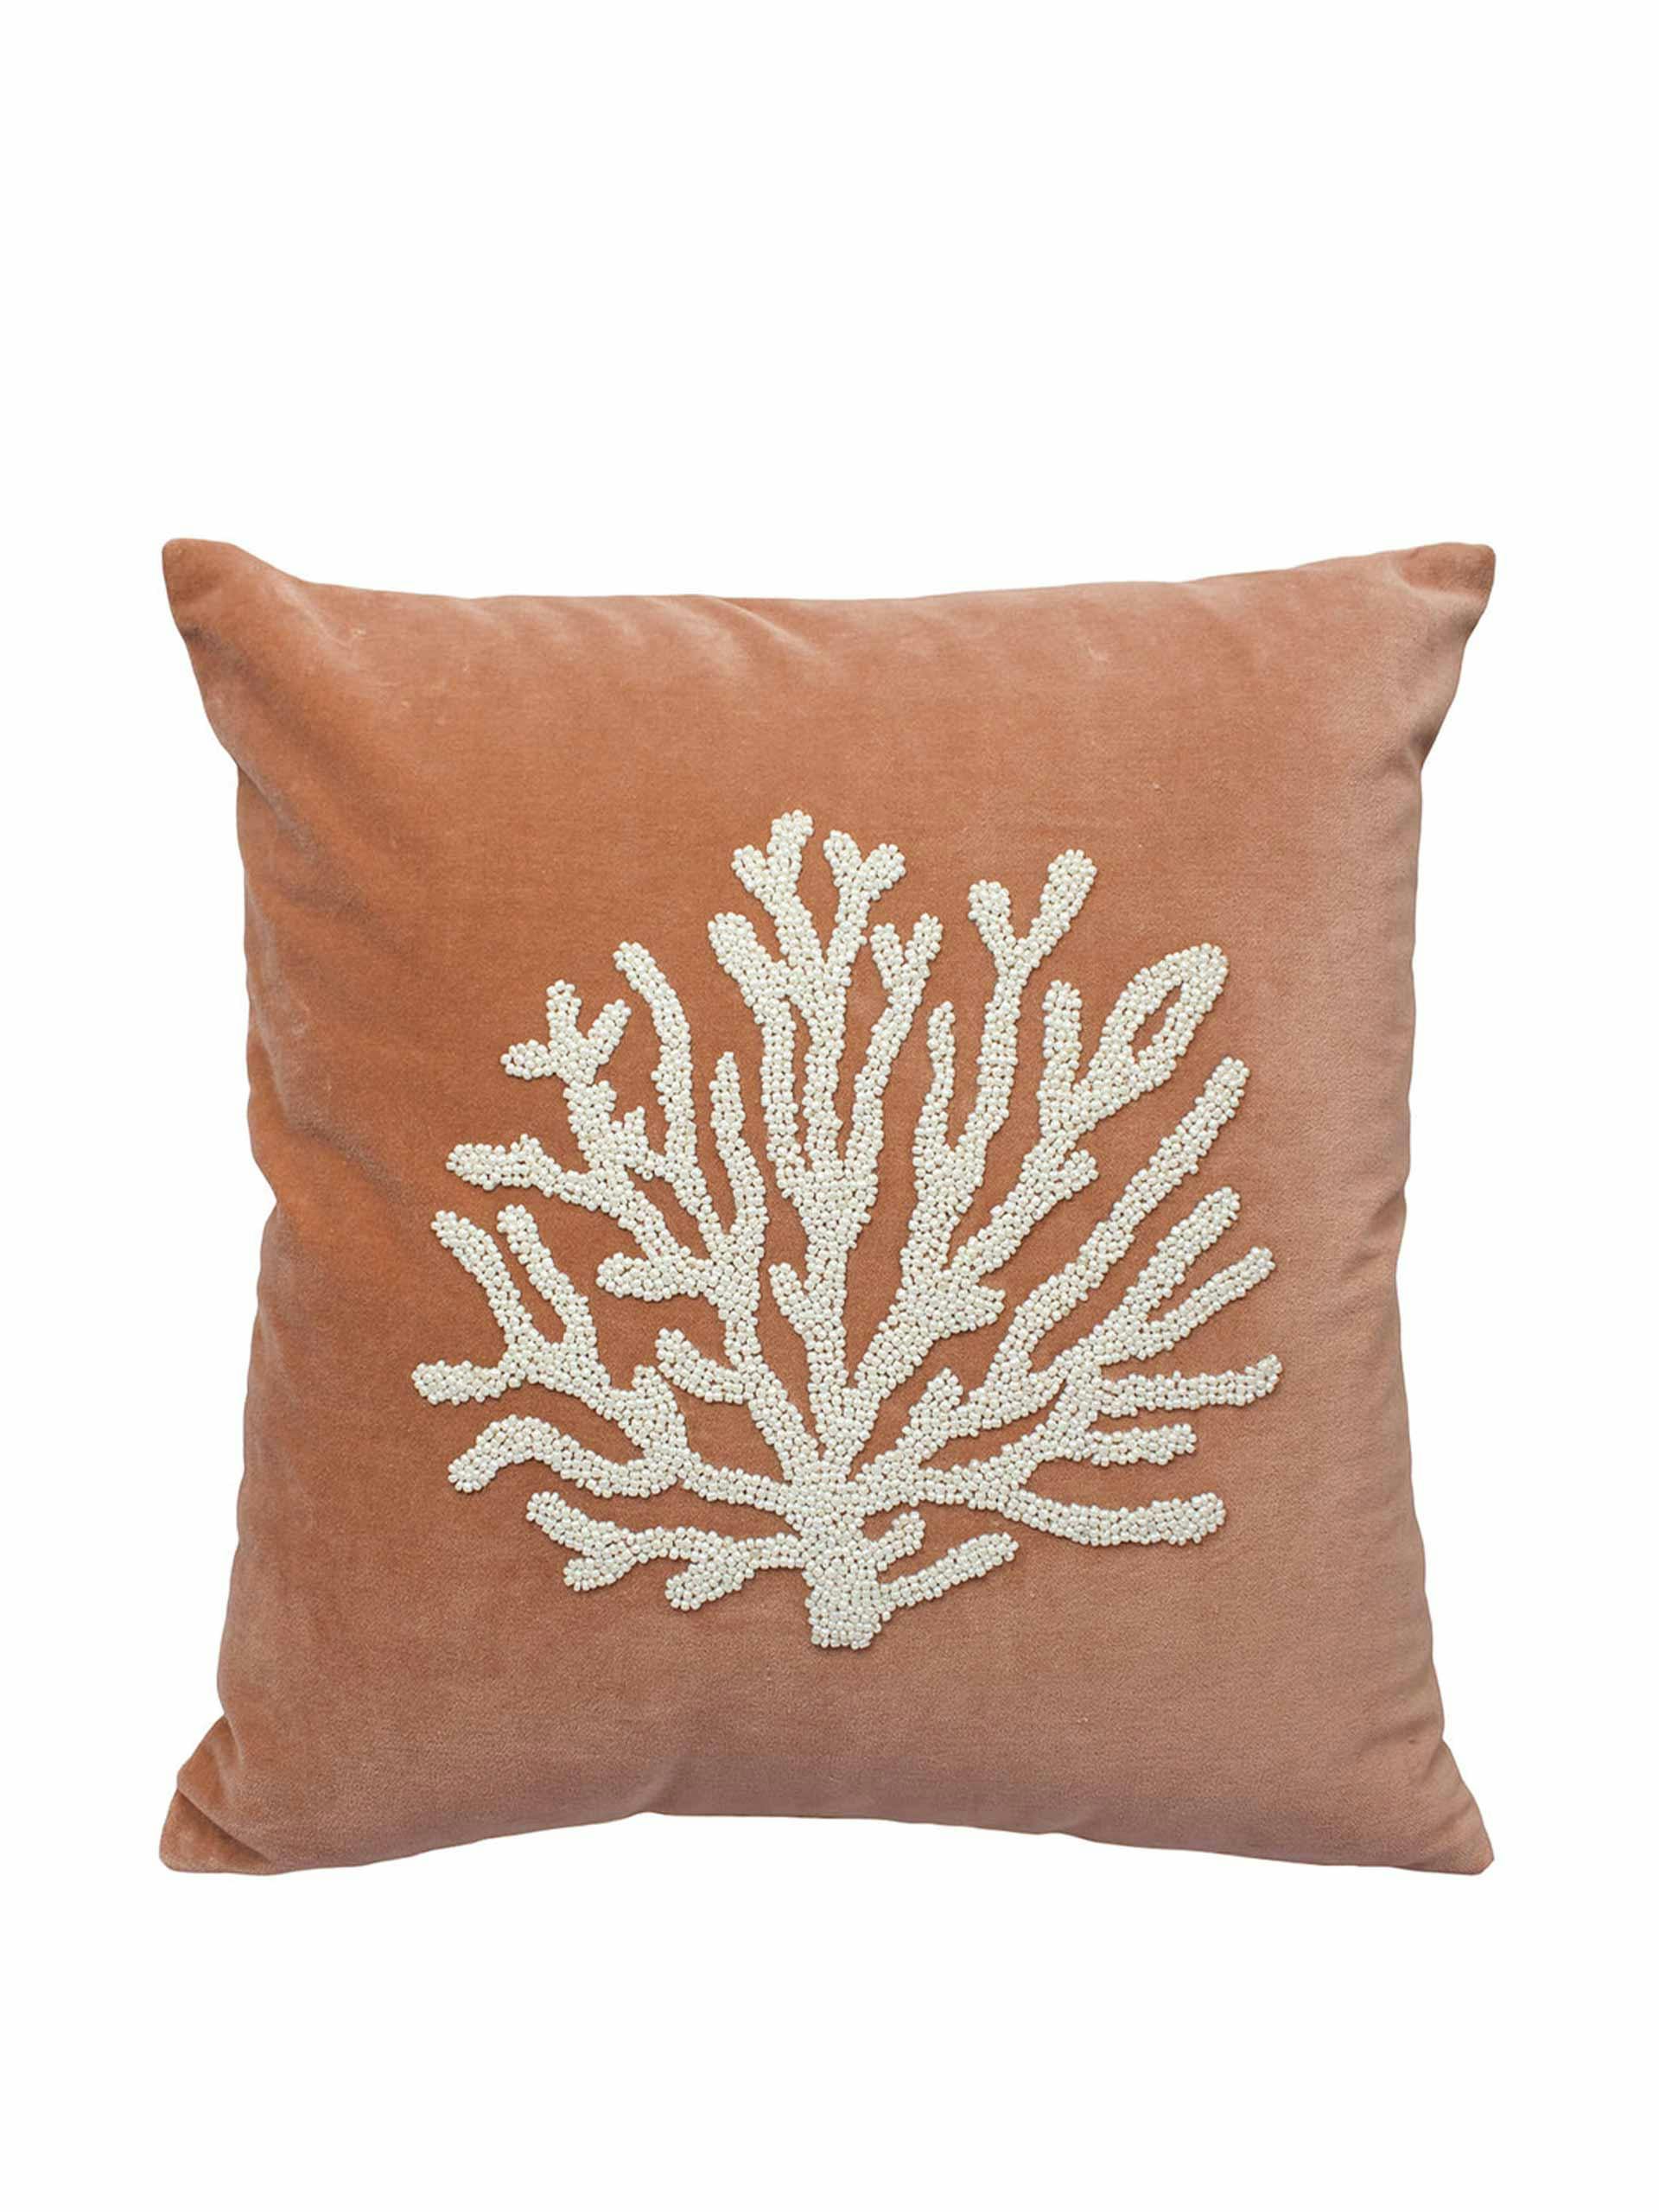 Velvet cushion with beaded coral